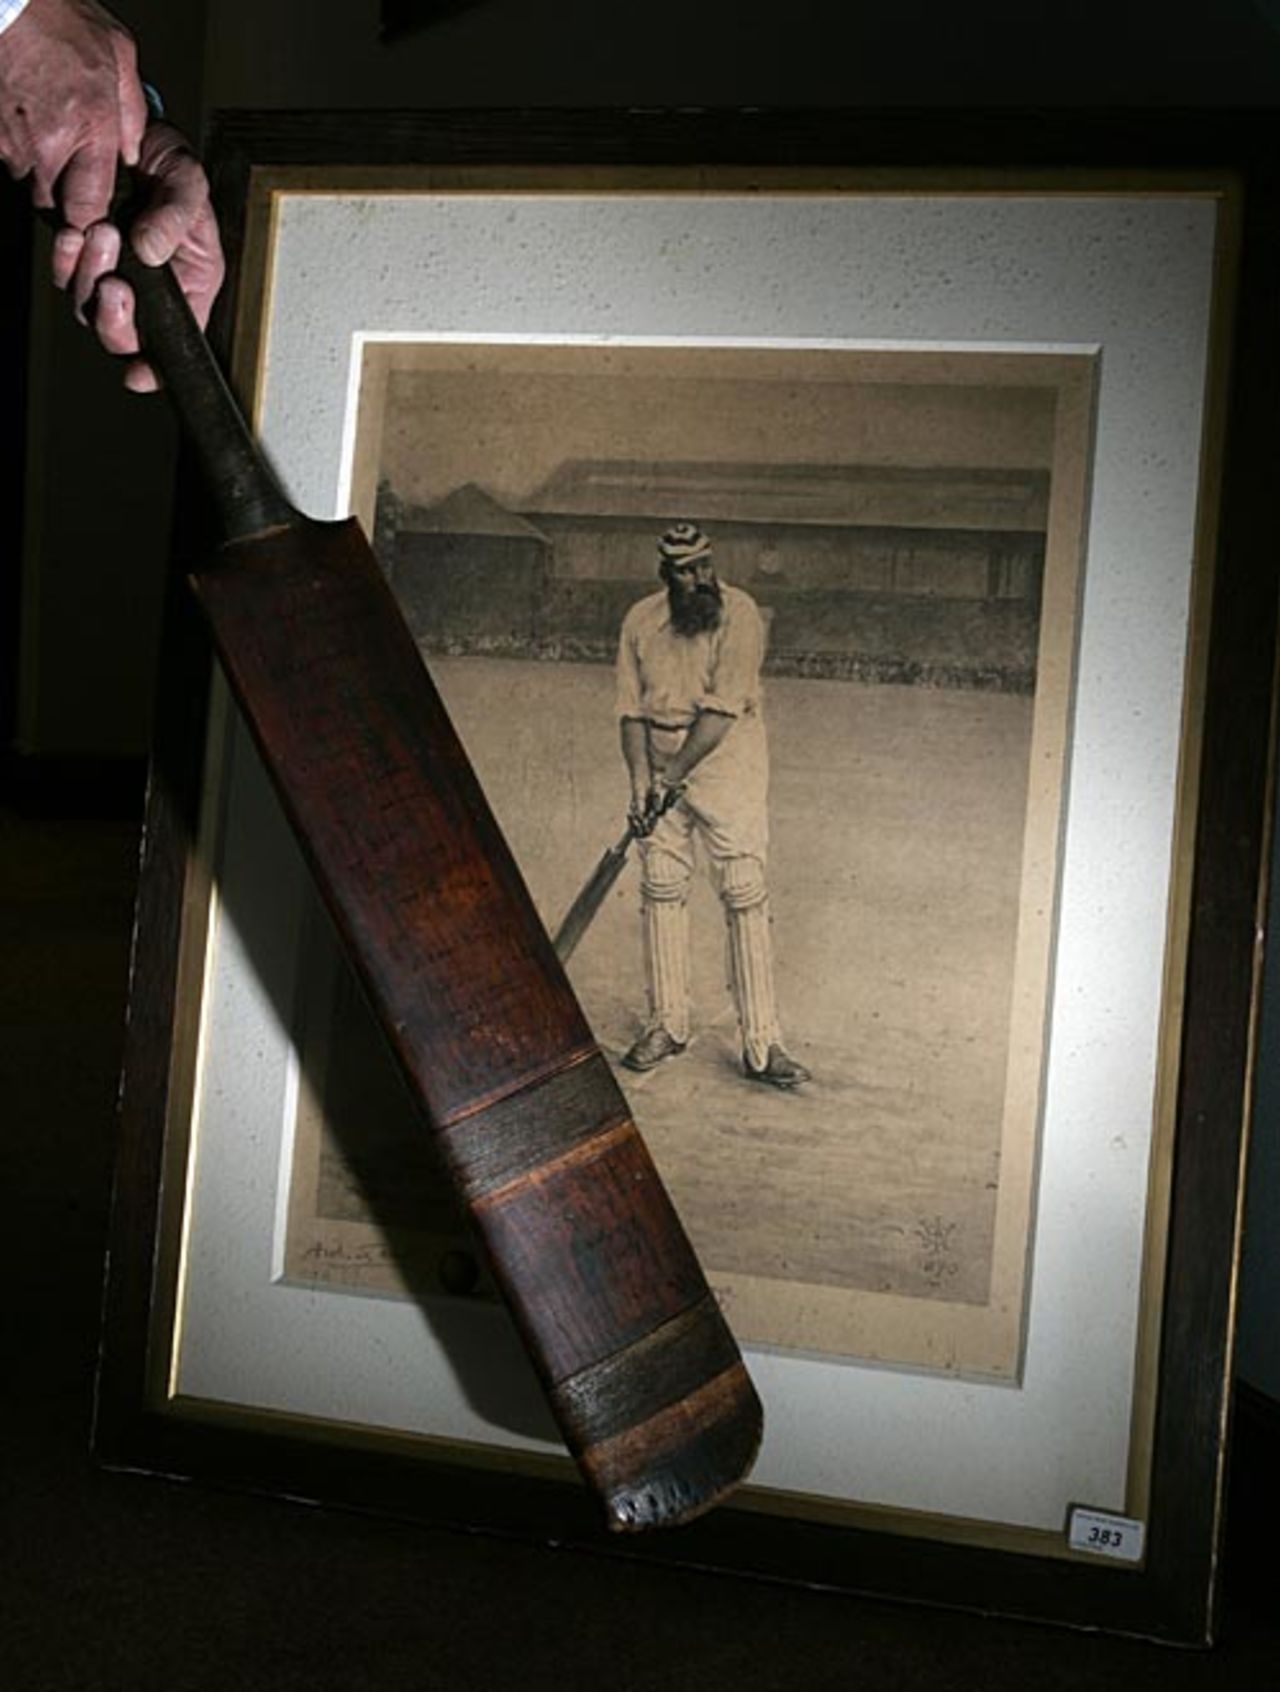 WG Grace's bat up for auction in London, Tuesday May, 12, 2009